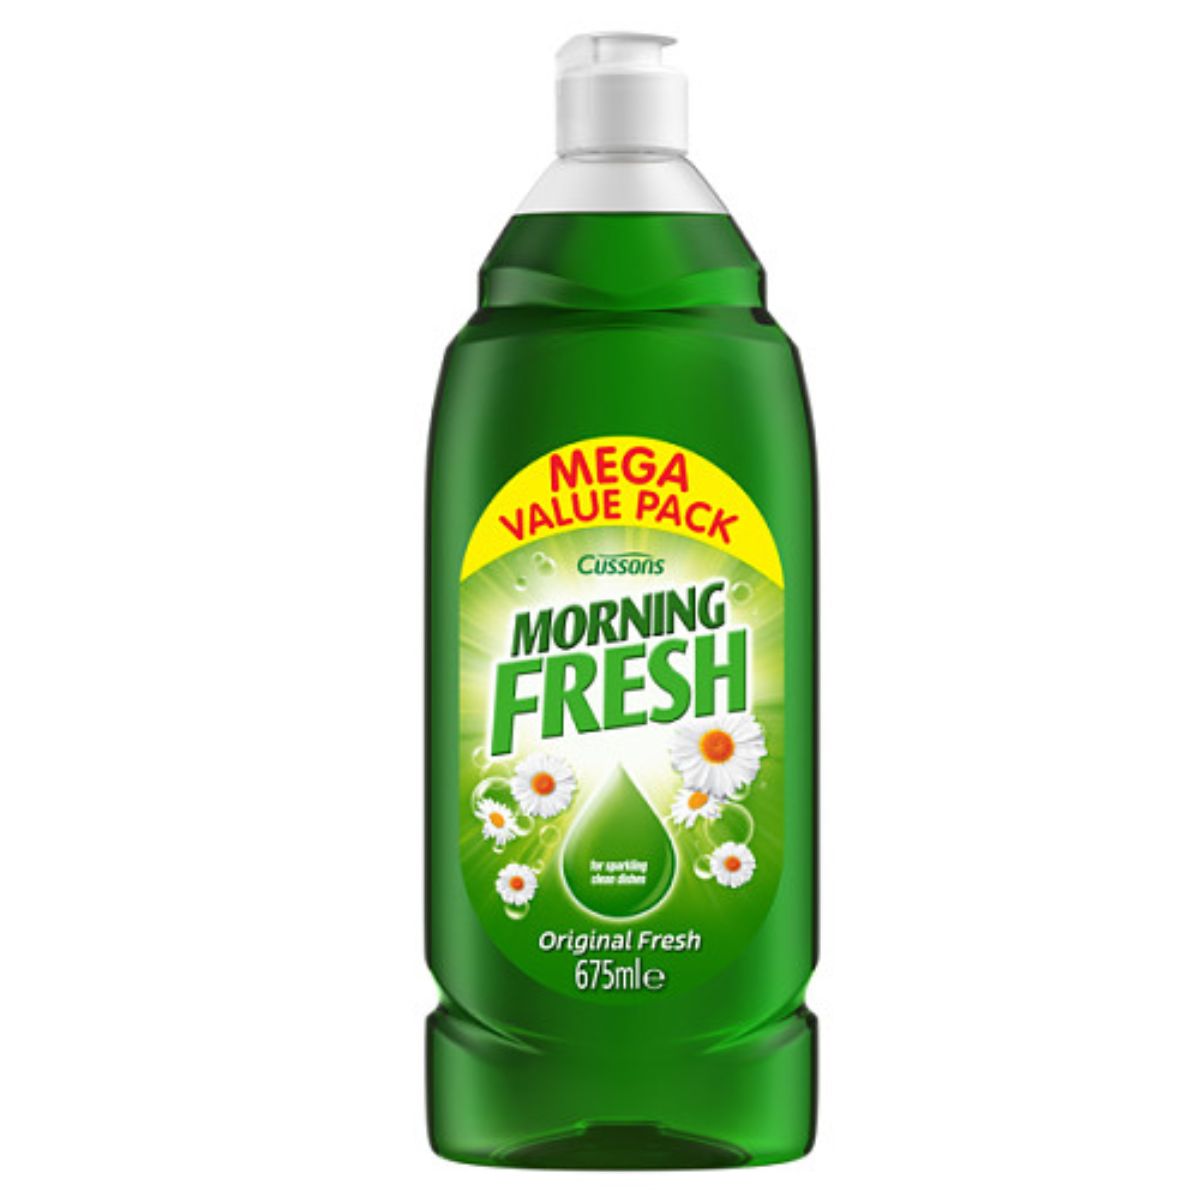 A bottle of Cussons - Morning Fresh Original - 675ml on a white background.